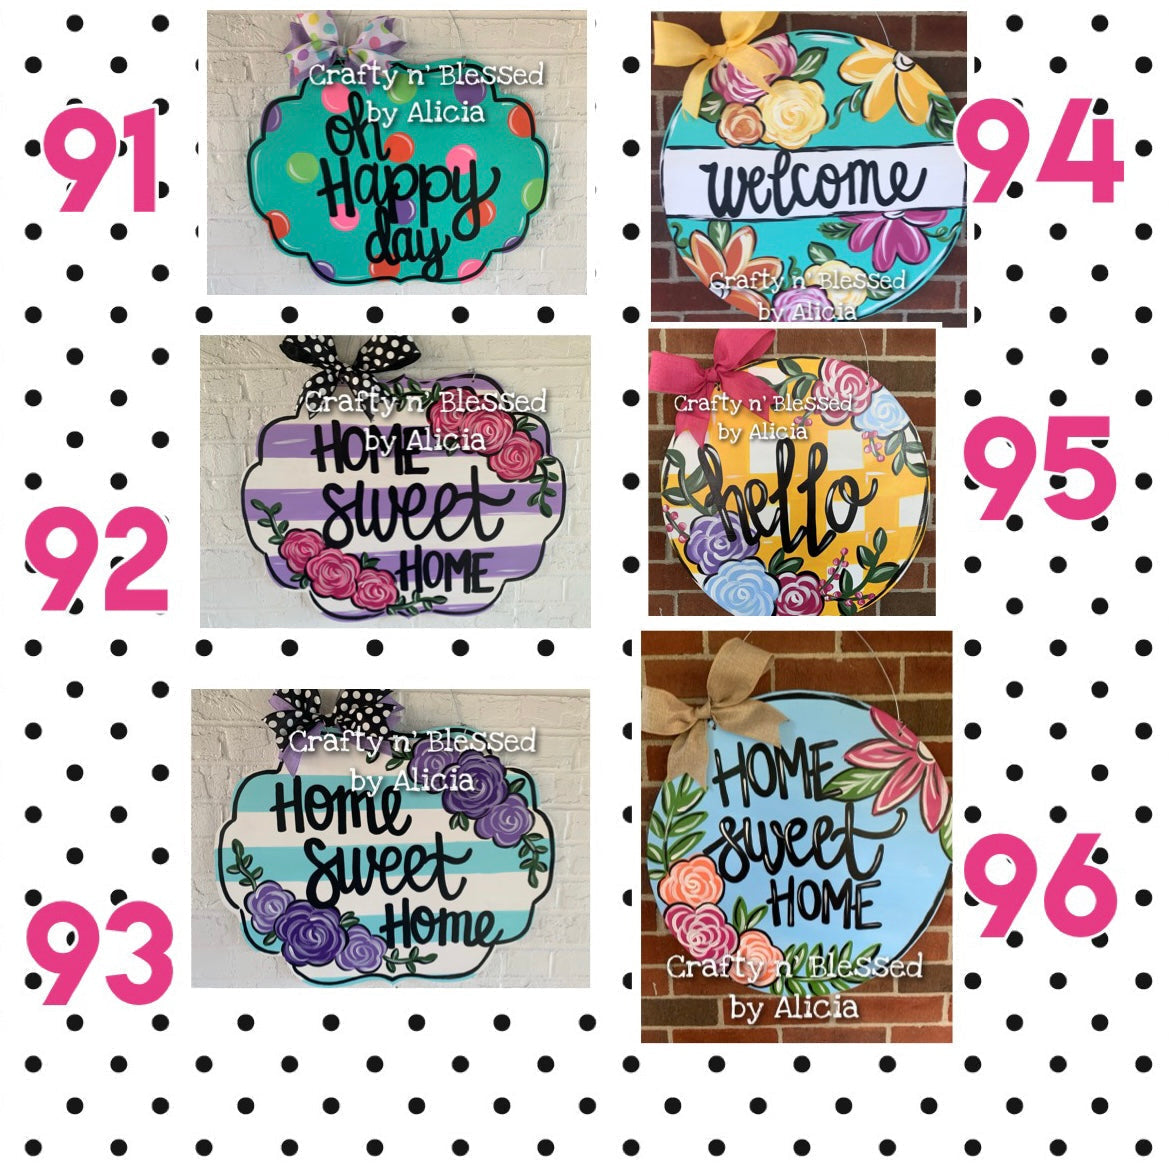 October 5th Public Mommy and Me Paint Party